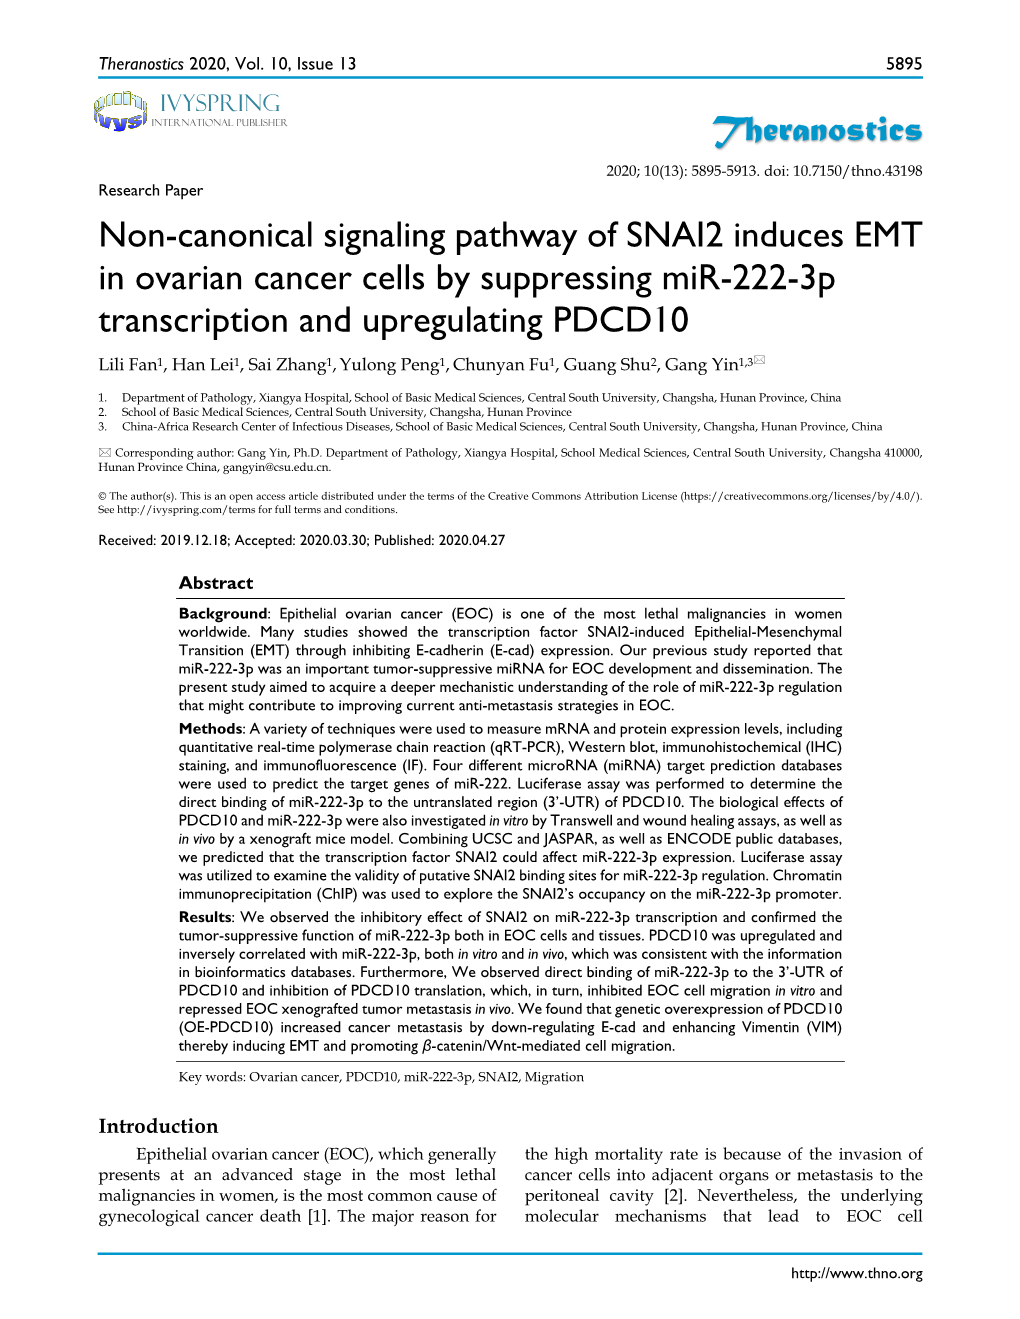 Theranostics Non-Canonical Signaling Pathway of SNAI2 Induces EMT In